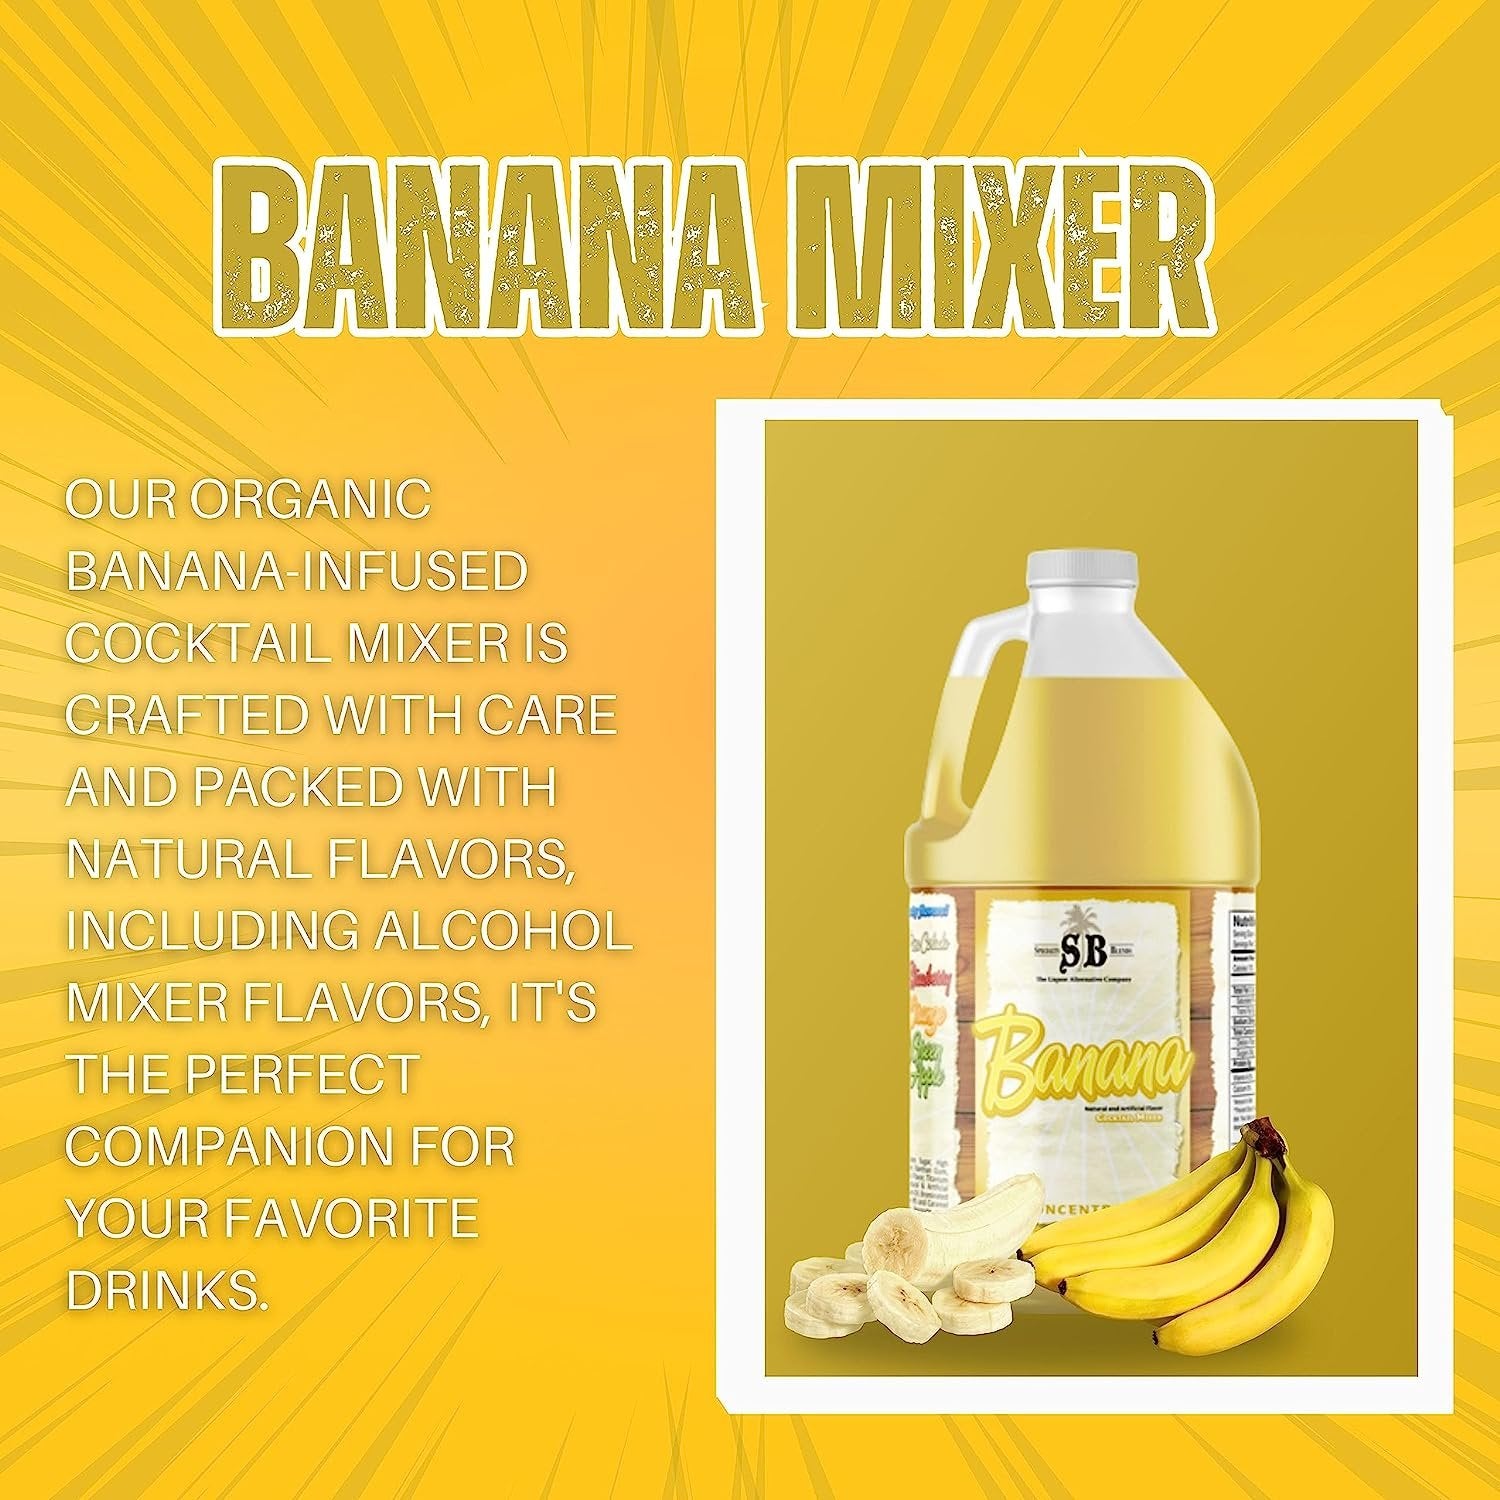 Specialty Blends Banana Flavored Syrup Cocktail Mixer Concentrate, Made with Organic Banana Flavor Syrups For Drinks, 1/2 Gallon (Pack of 1) - with Bonus Worldwide Nutrition Multi Purpose Key Chain